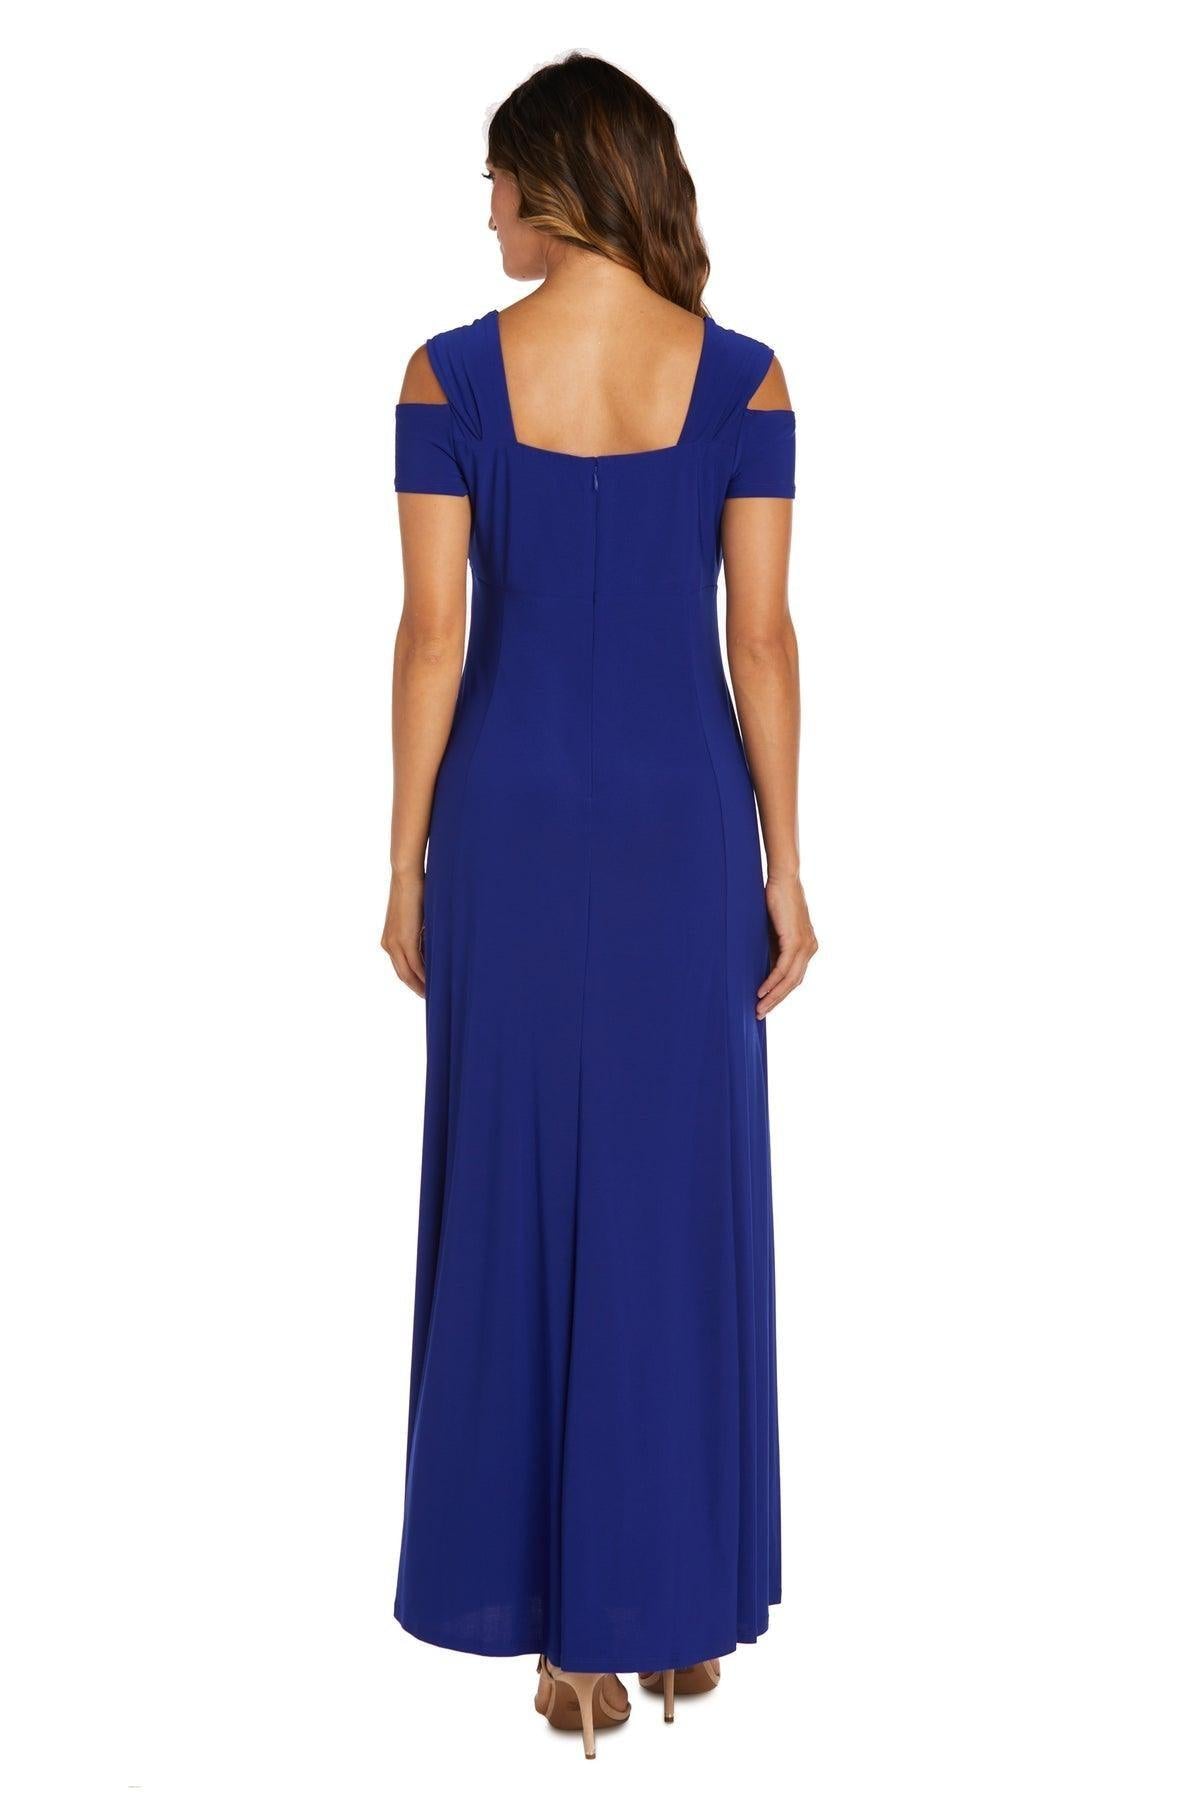 R&M Richards 1367 Evening Long Formal Dress Clearance | The Dress Outlet